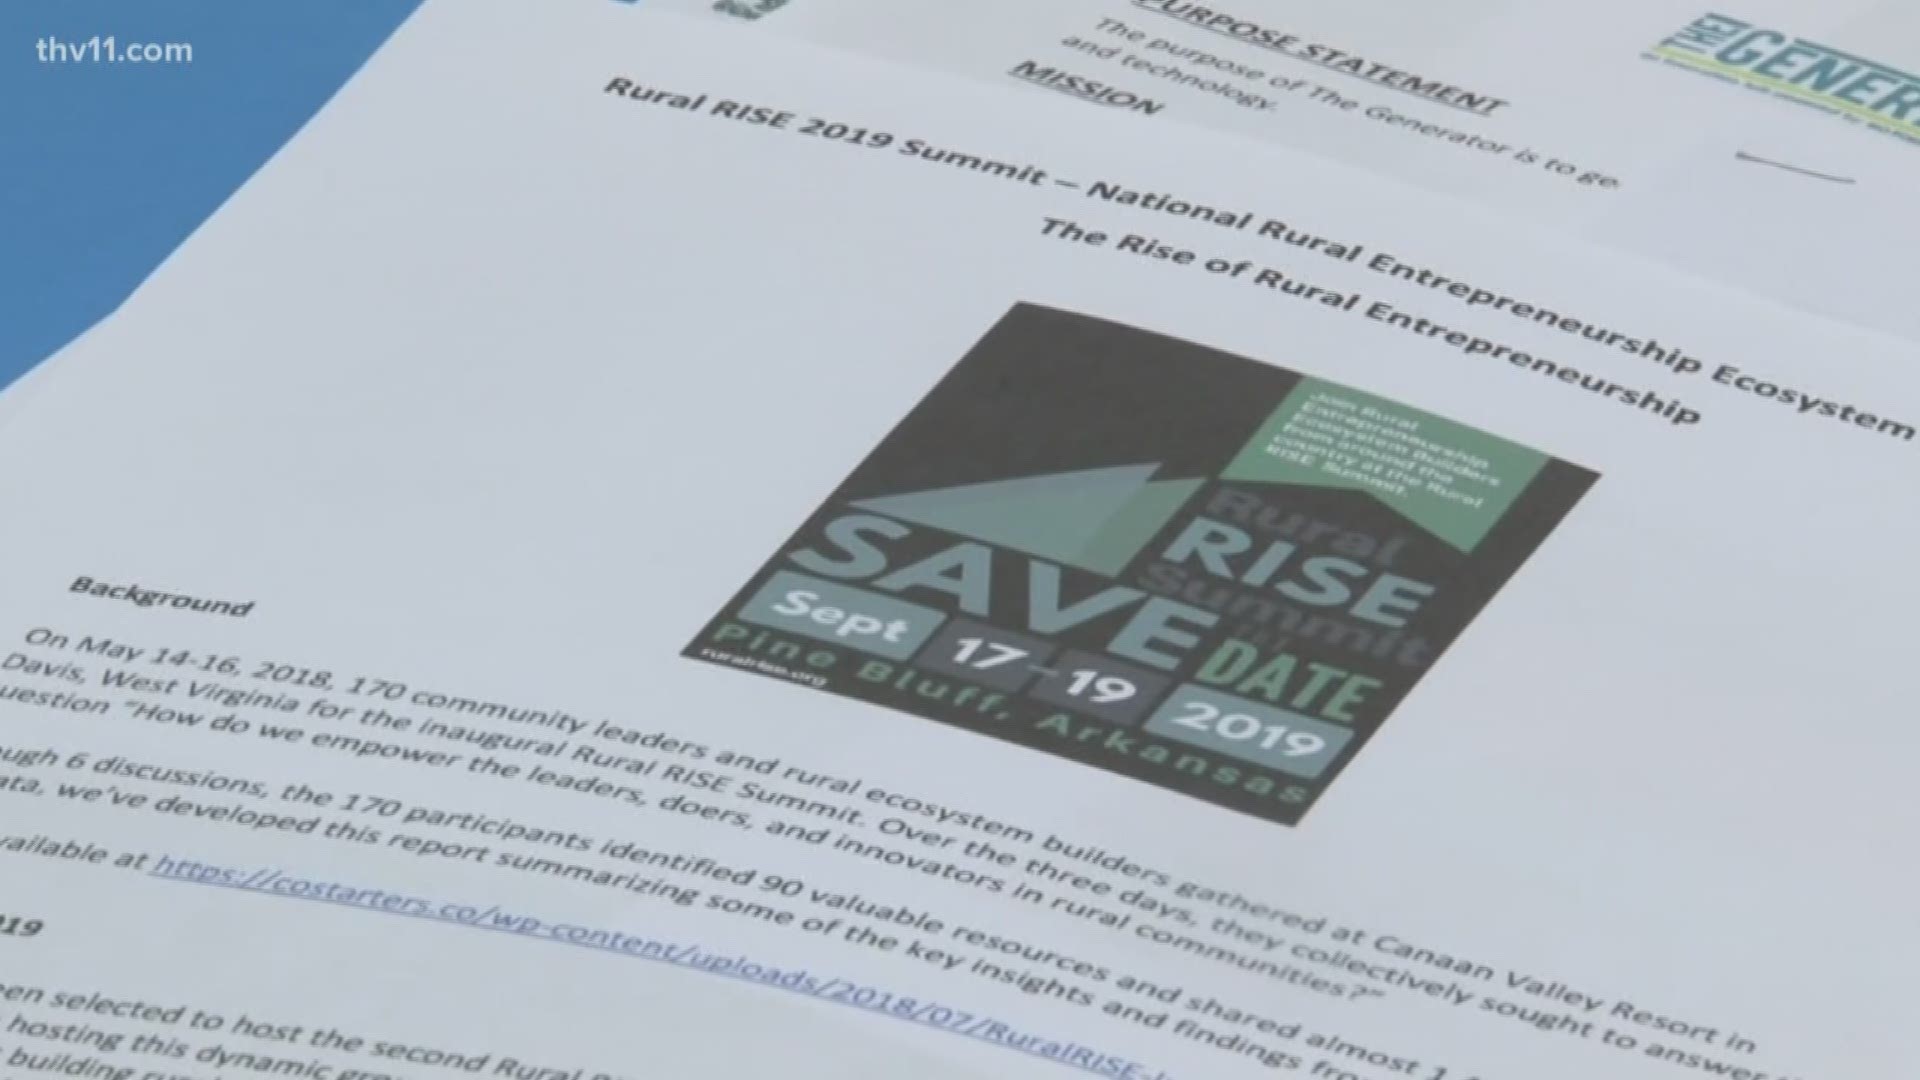 Pine Bluff will host the Rural Rise Summit next week. People from across the country will talk about how they can make rural areas better for entrepreneurs.